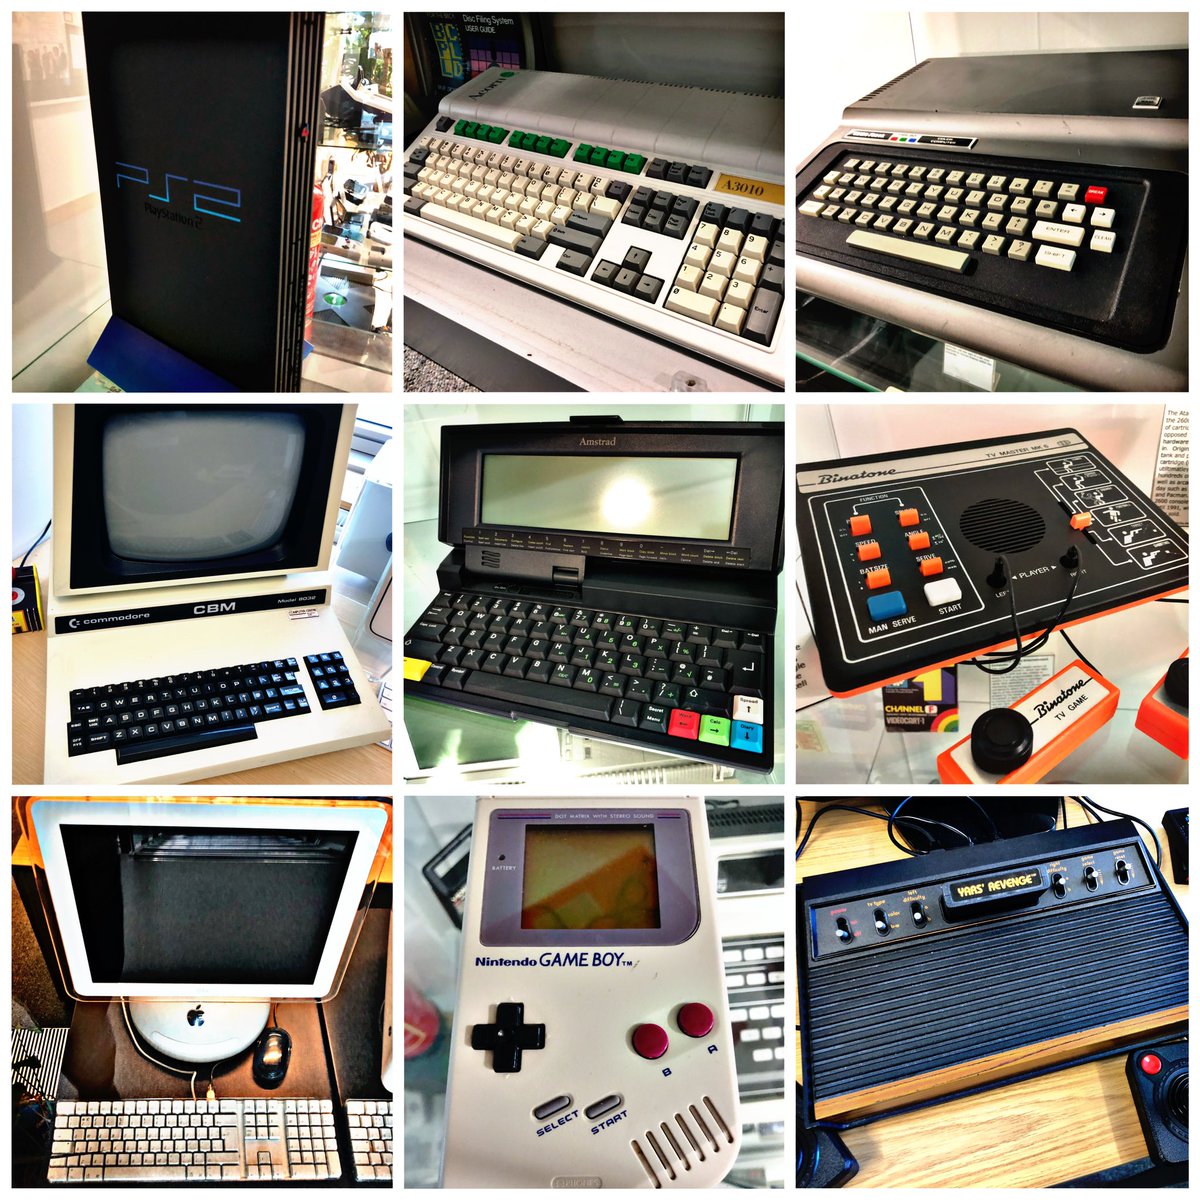 This week’s #RetroEnnead offers you the #PS2, #A3010, #CoCo, #CBM8032, #NC200, #Binatone, #iMacG4, #GameBoy and #AtariVCS.  Choose a line of 3 and lose the rest! #RetroComputing #ComputerHistory #RetroGaming #VideoGames